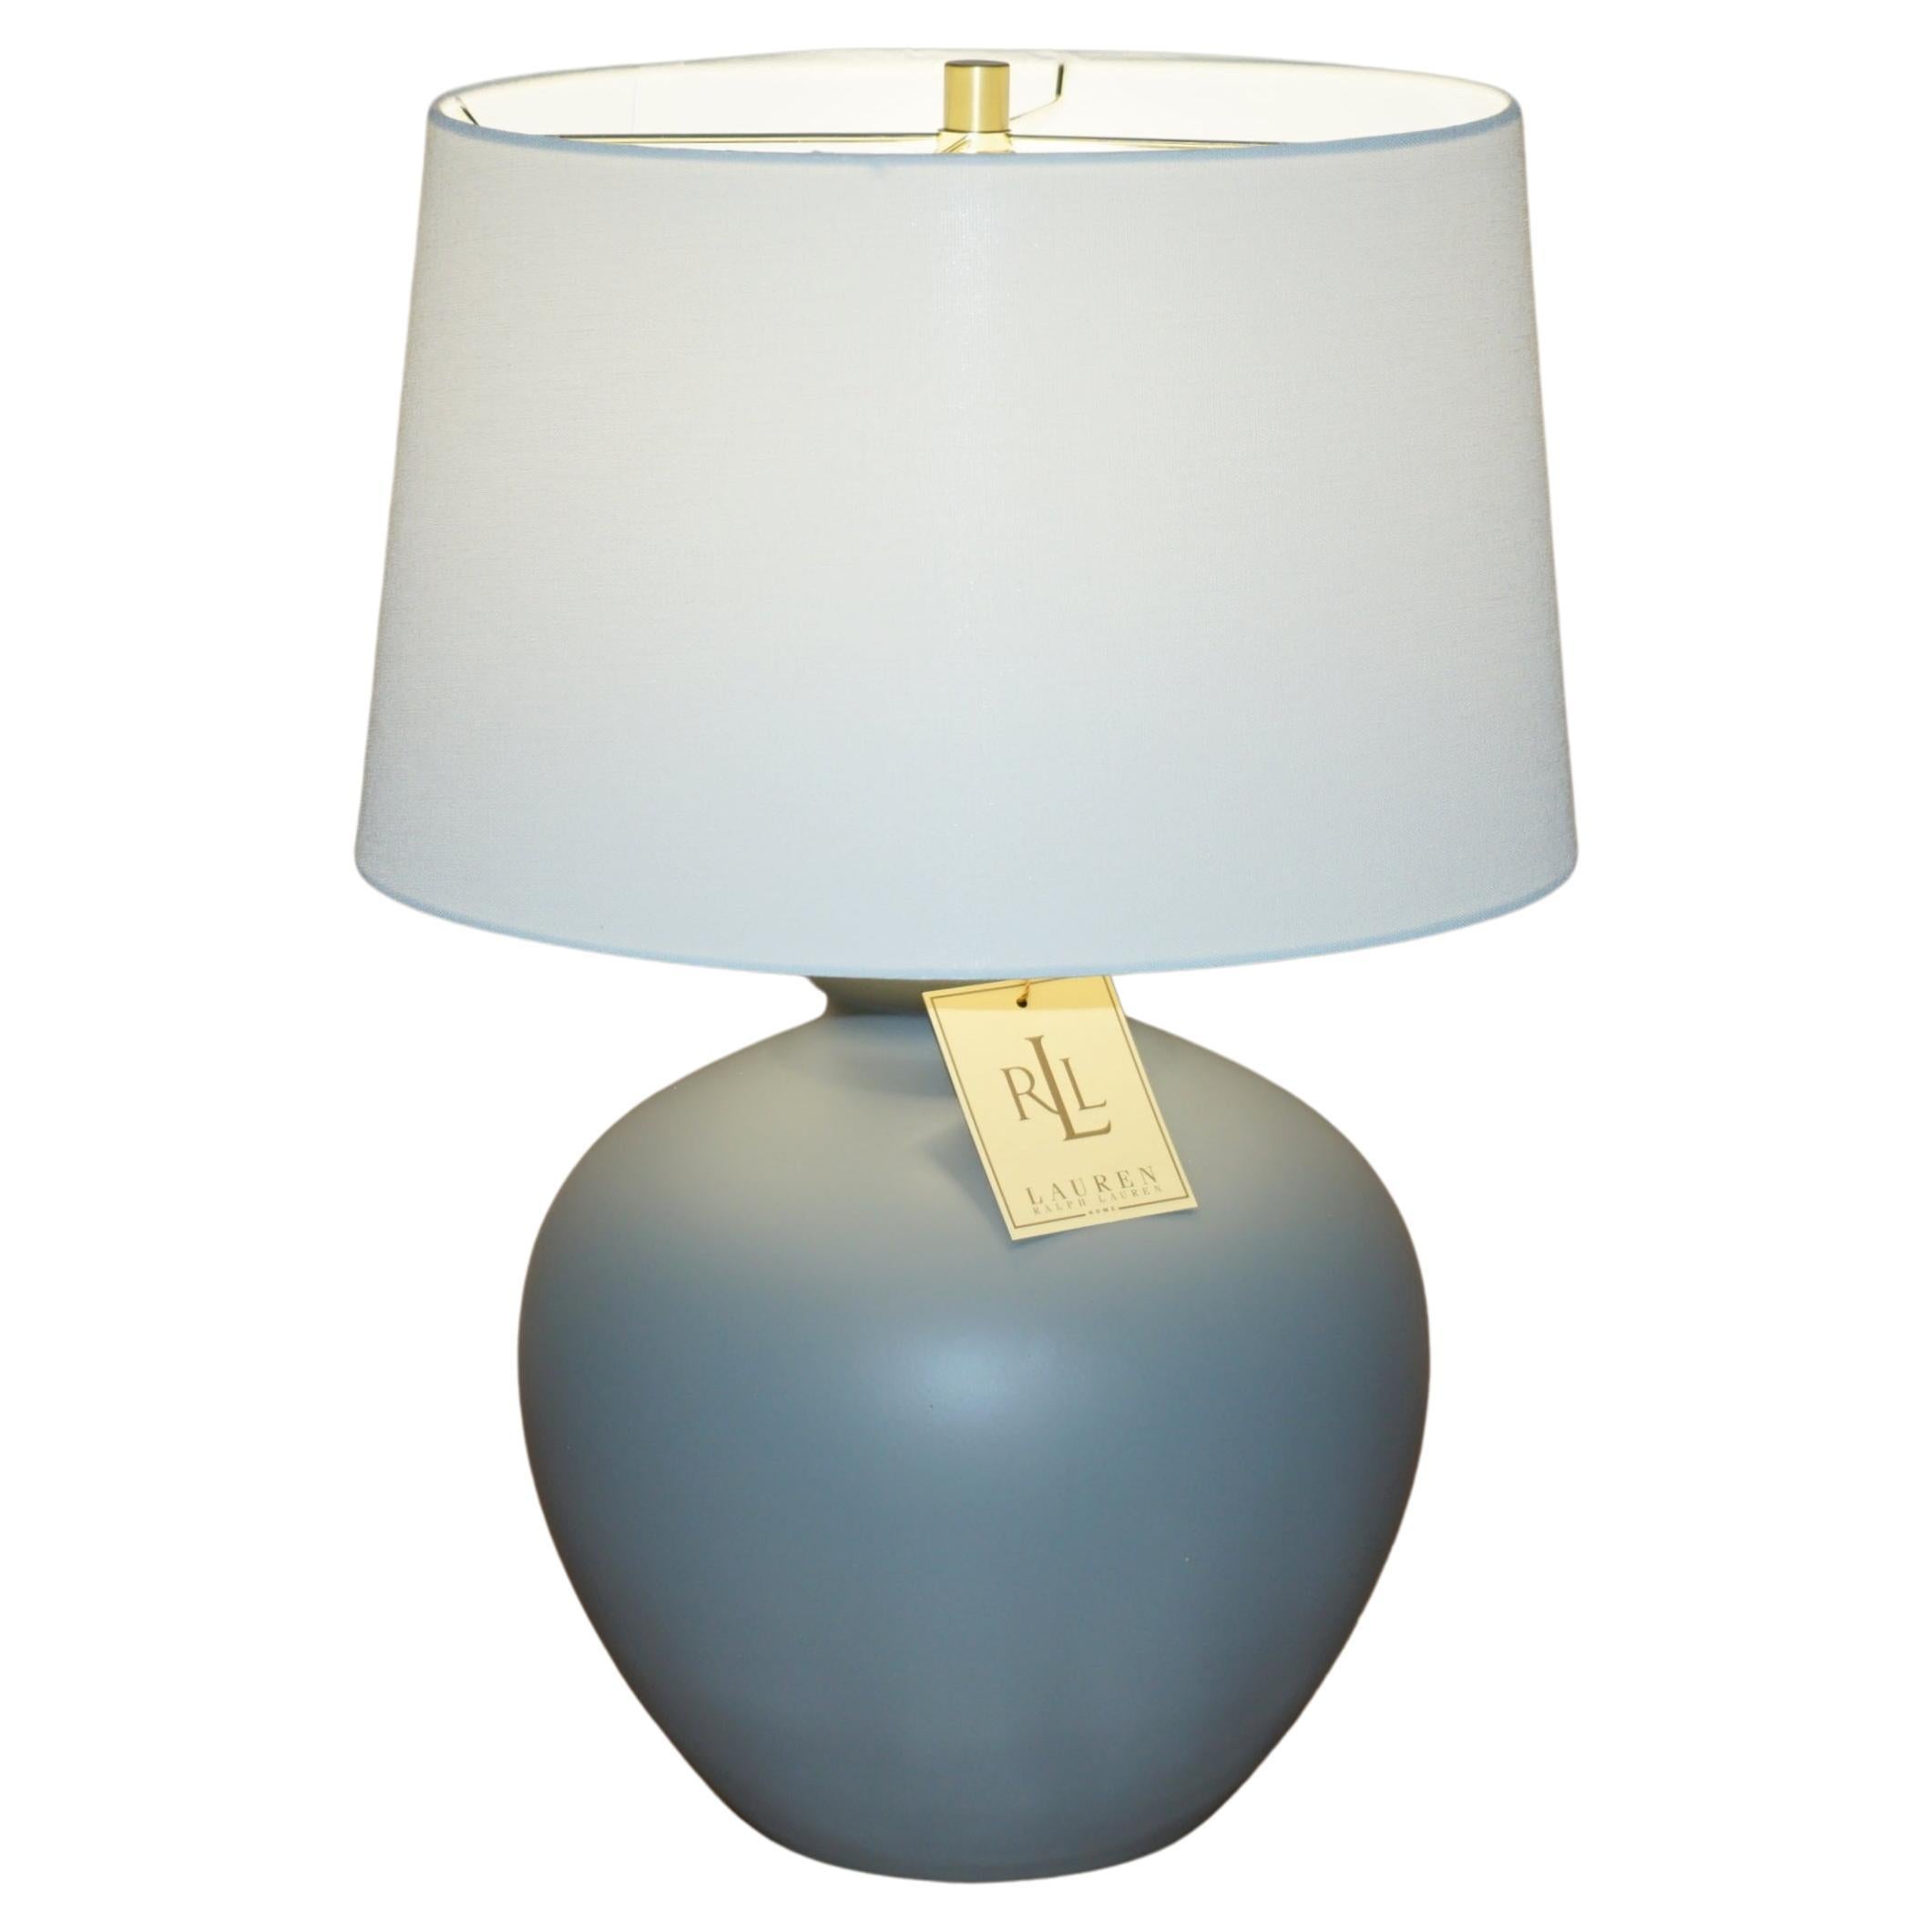 1 OF 2 BRAND NEW IN THE BOX RALPH LAUREN CERAMIC GREY VASE SHAPE TABLE LAMPs For Sale